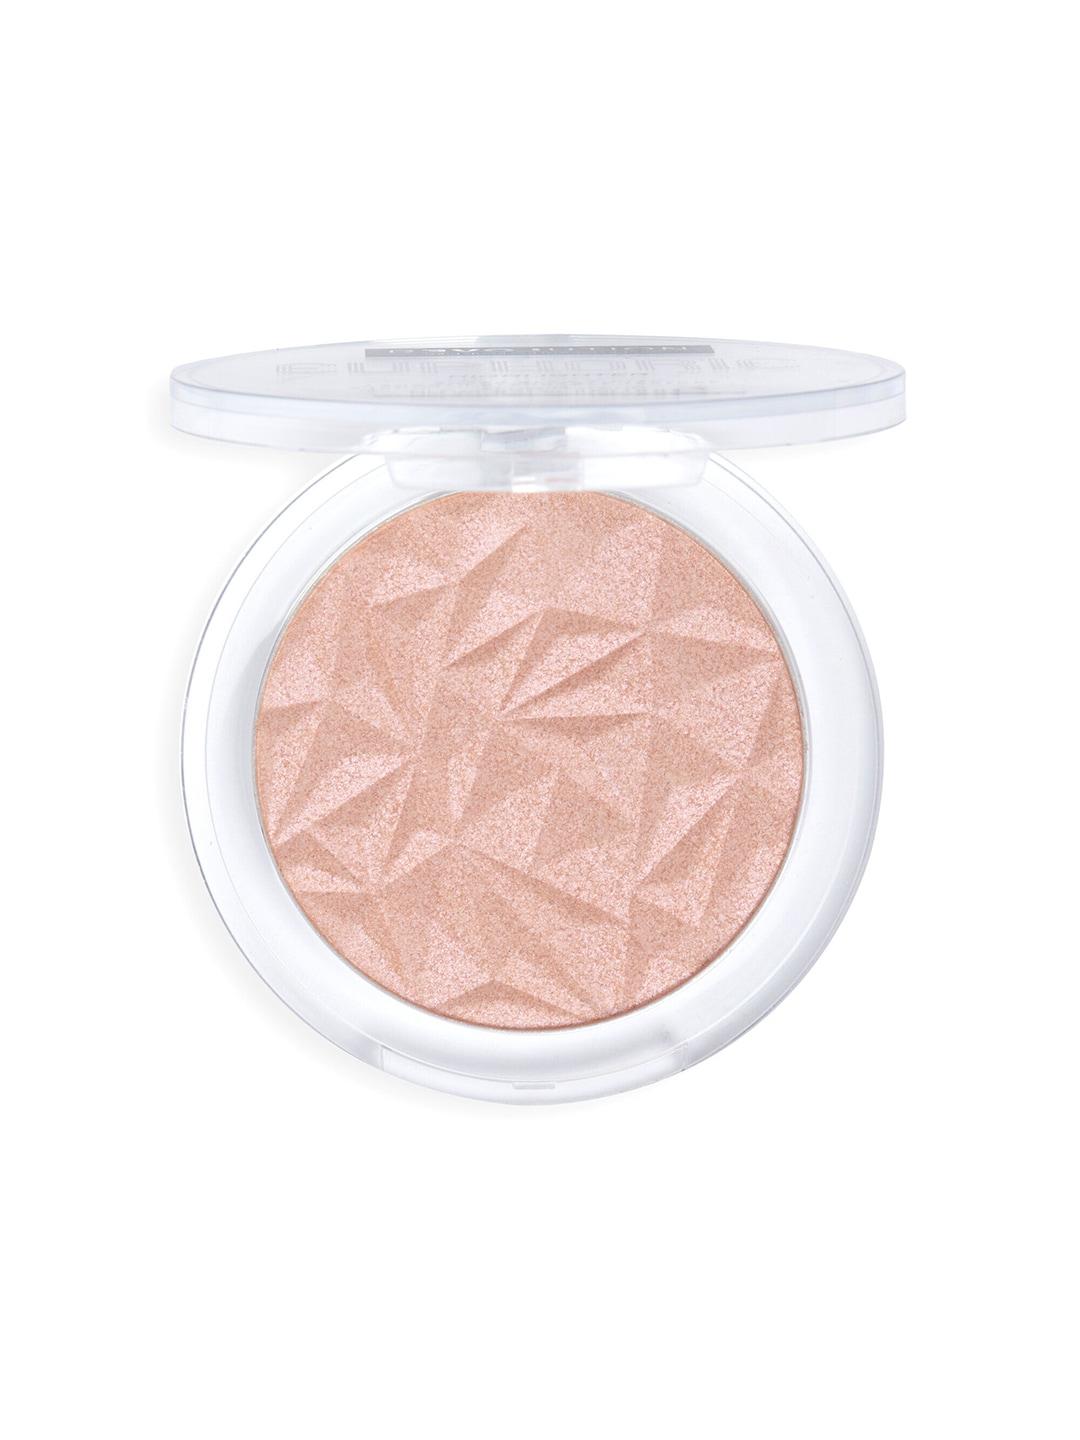 relove highlighter with super glow finish 6 g - euphoric